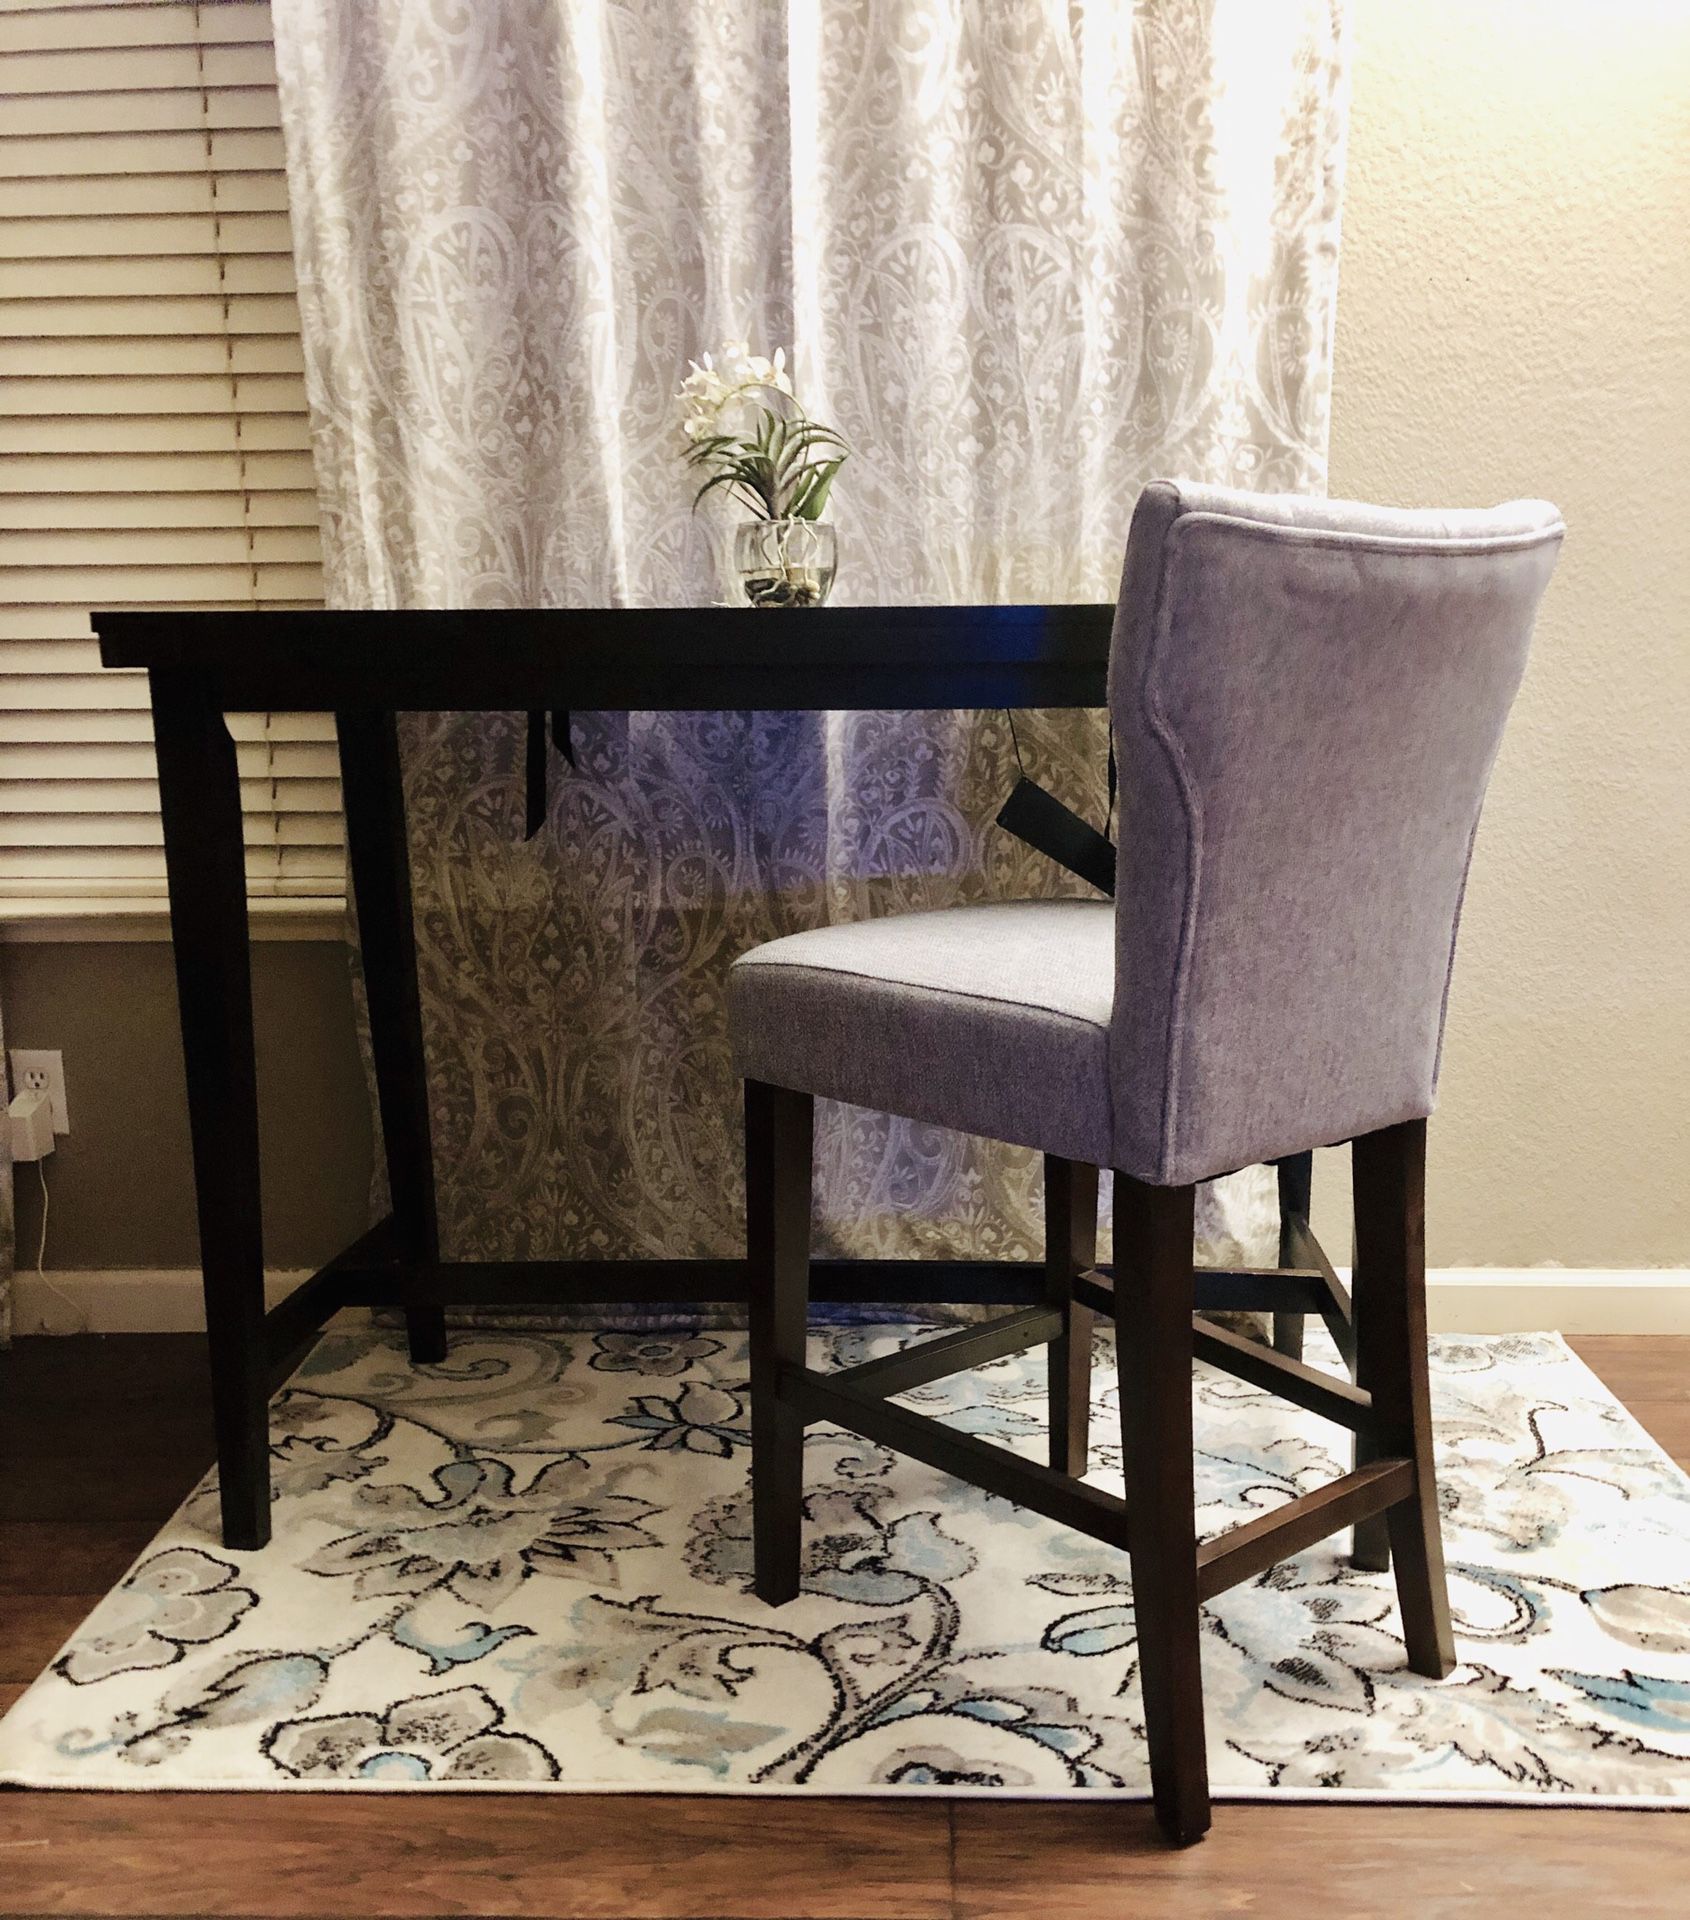 ⭐️NEW Ashely Furniture counter height Dining Table ONLY. IF YOU WANT WITH COUNTERCHAIR(new) $25 more. ⚡️DAMAGED during shipping (one corner)